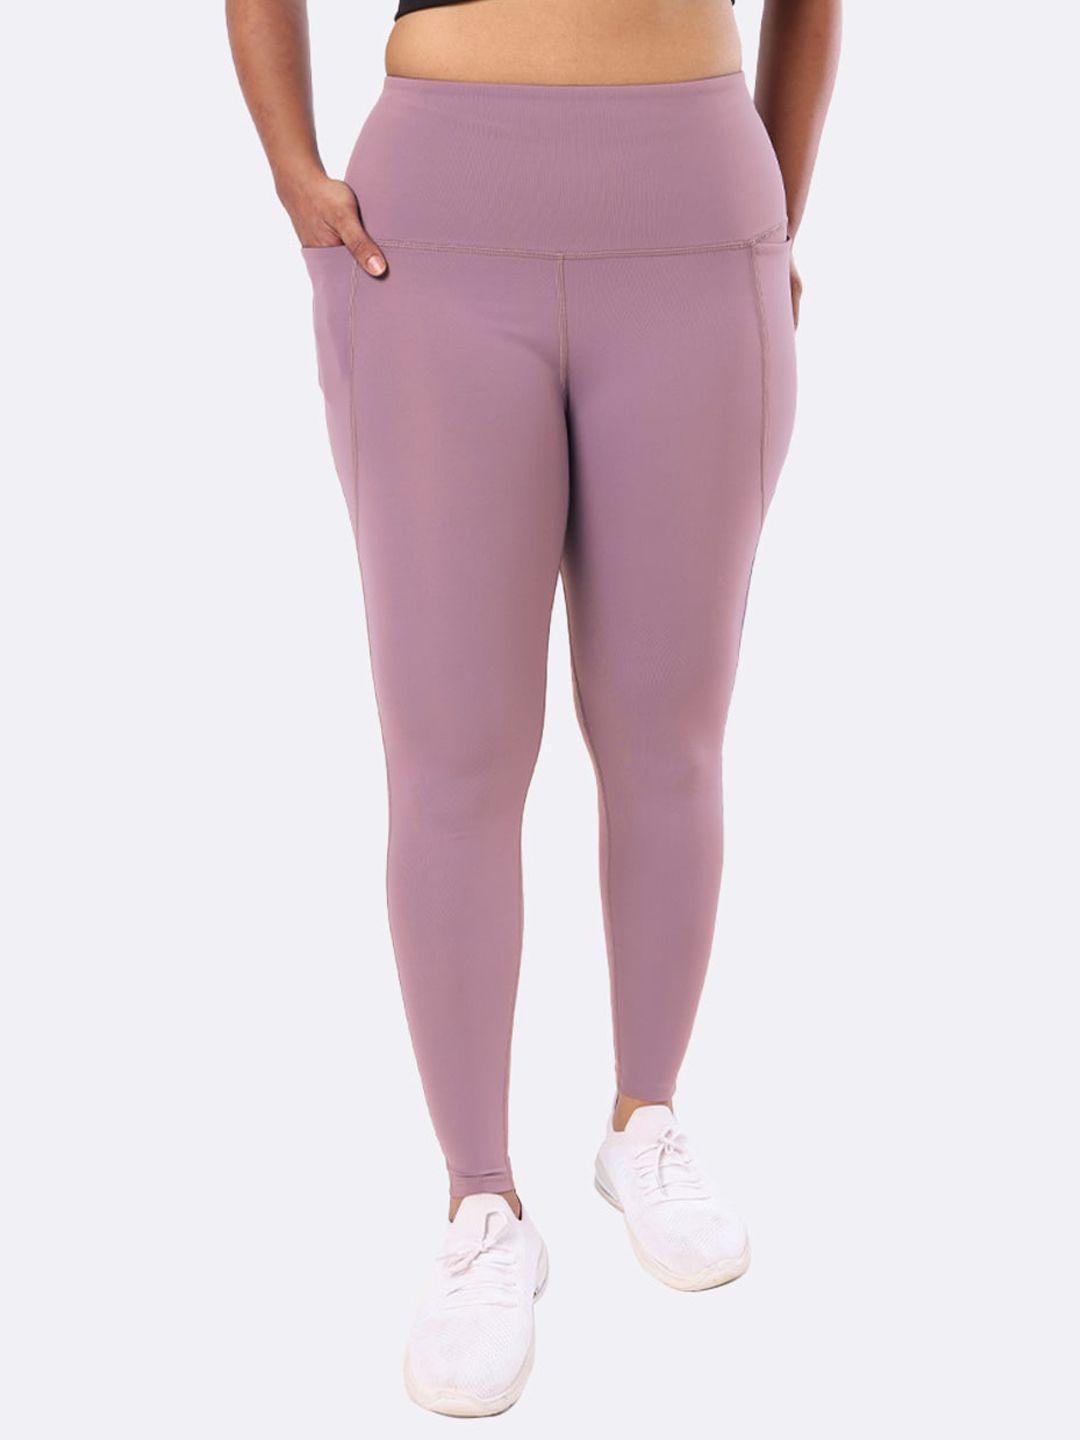 blissclub women pink solid ankle length training tights